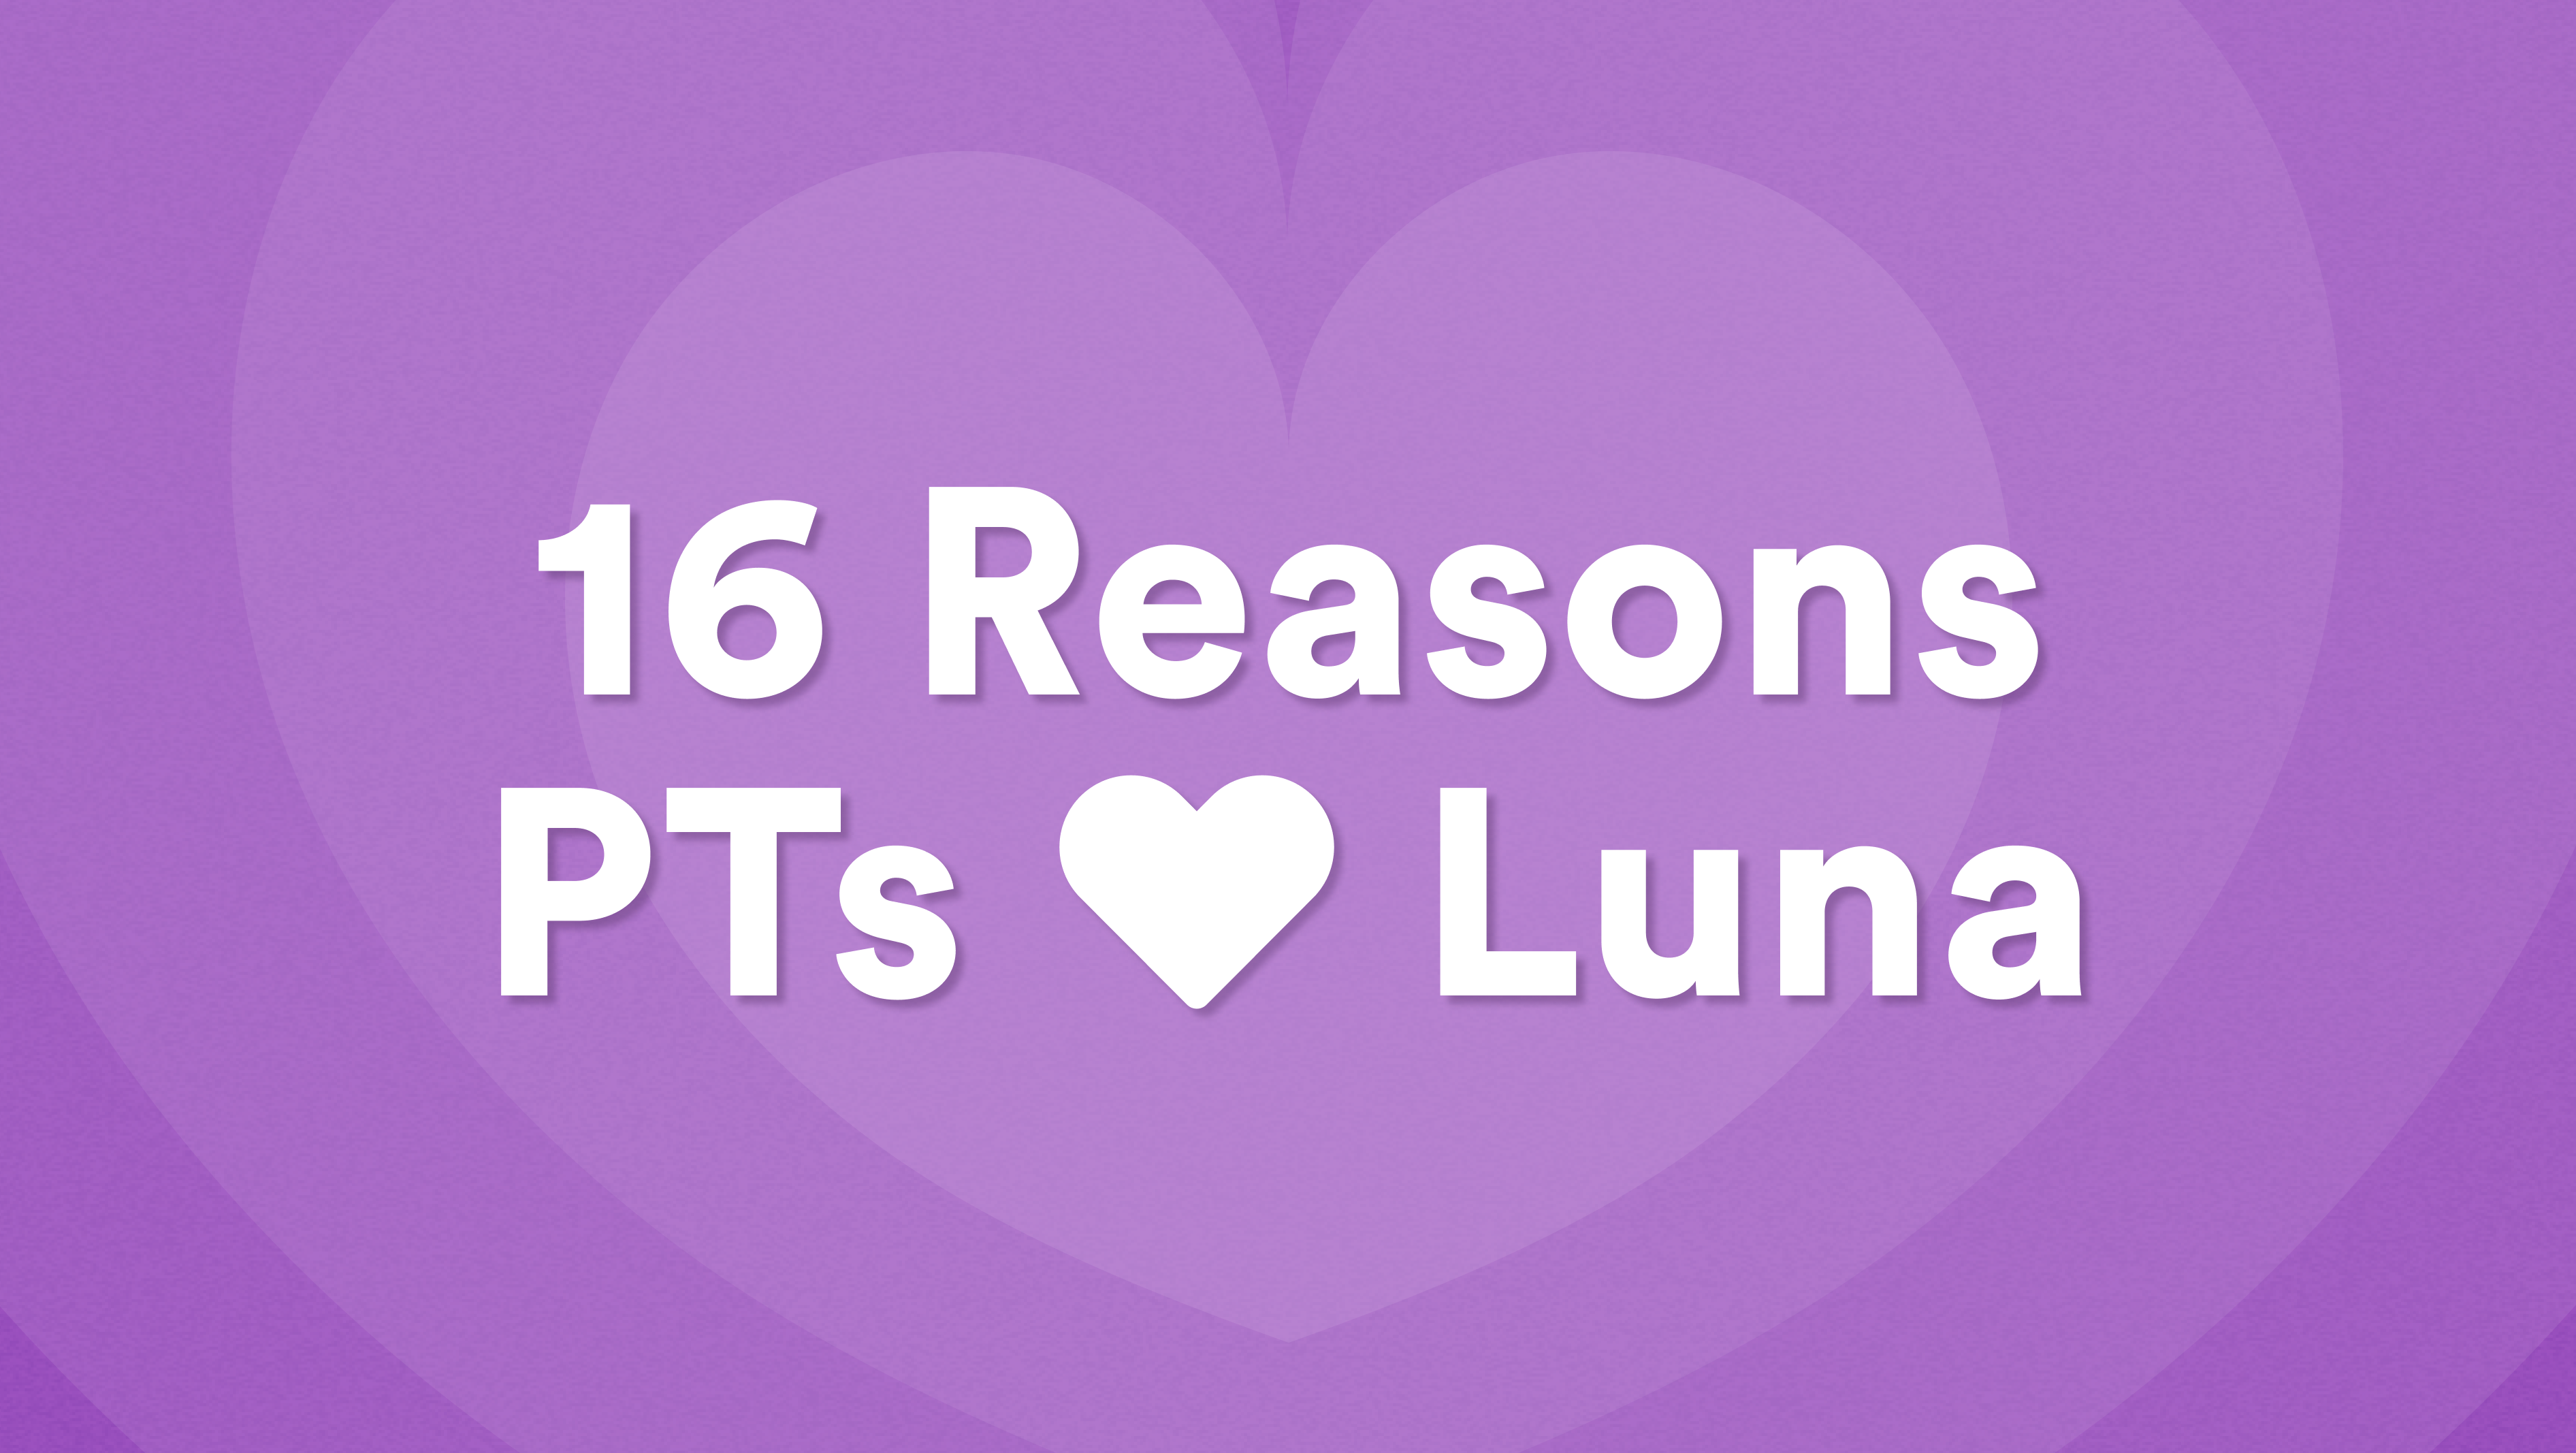 Delivering Outpatient Care to Patients’ Doorsteps - 16 Reasons Physical Therapists are Loving Luna